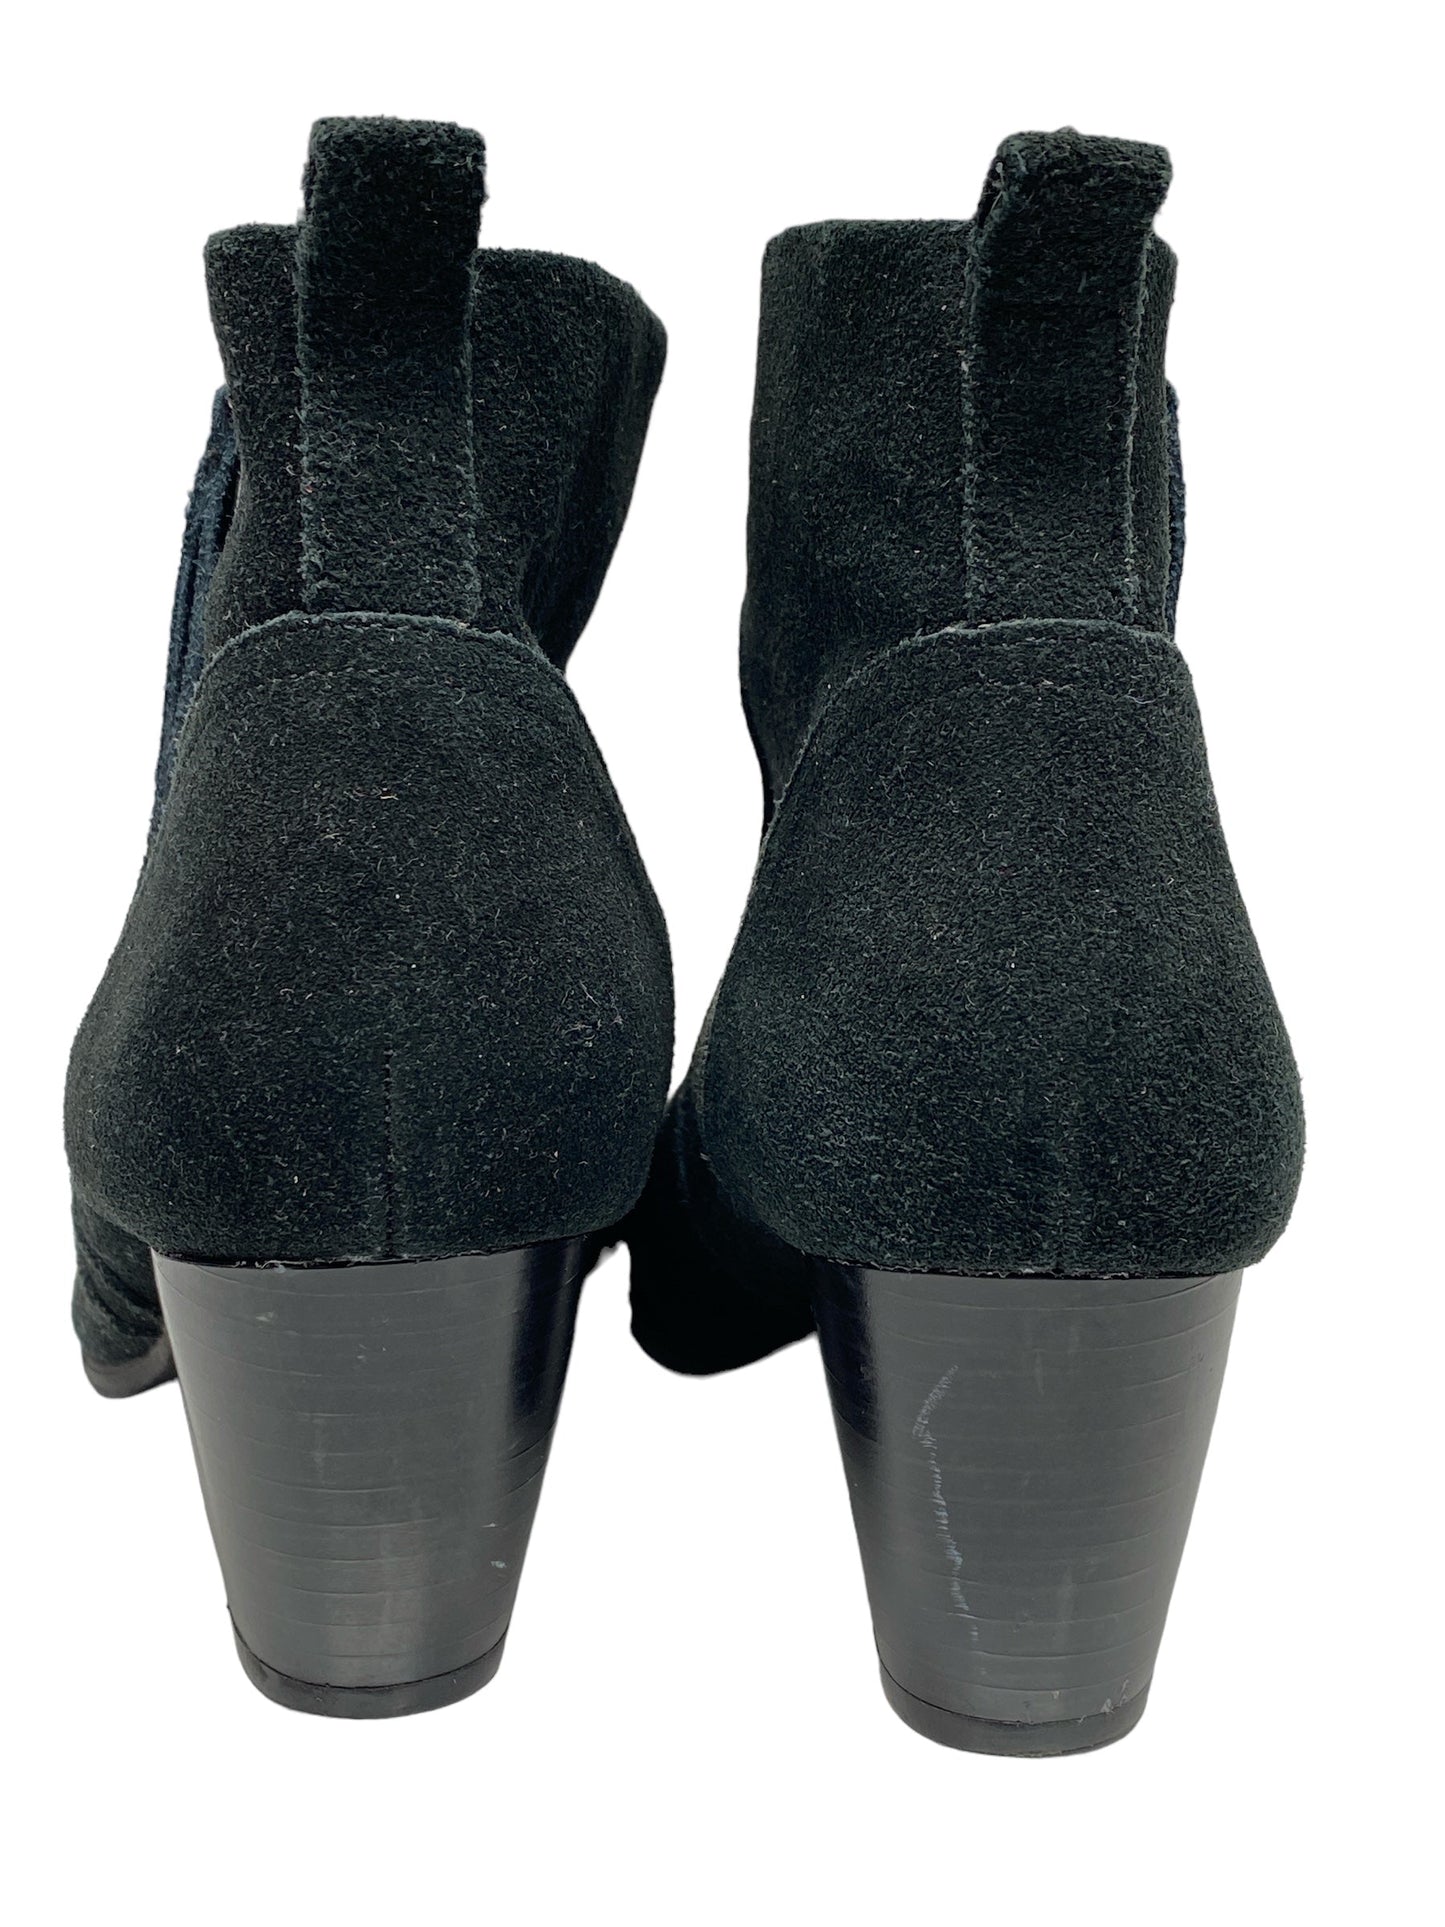 Boots Ankle Heels By Sam And Libby  Size: 6.5